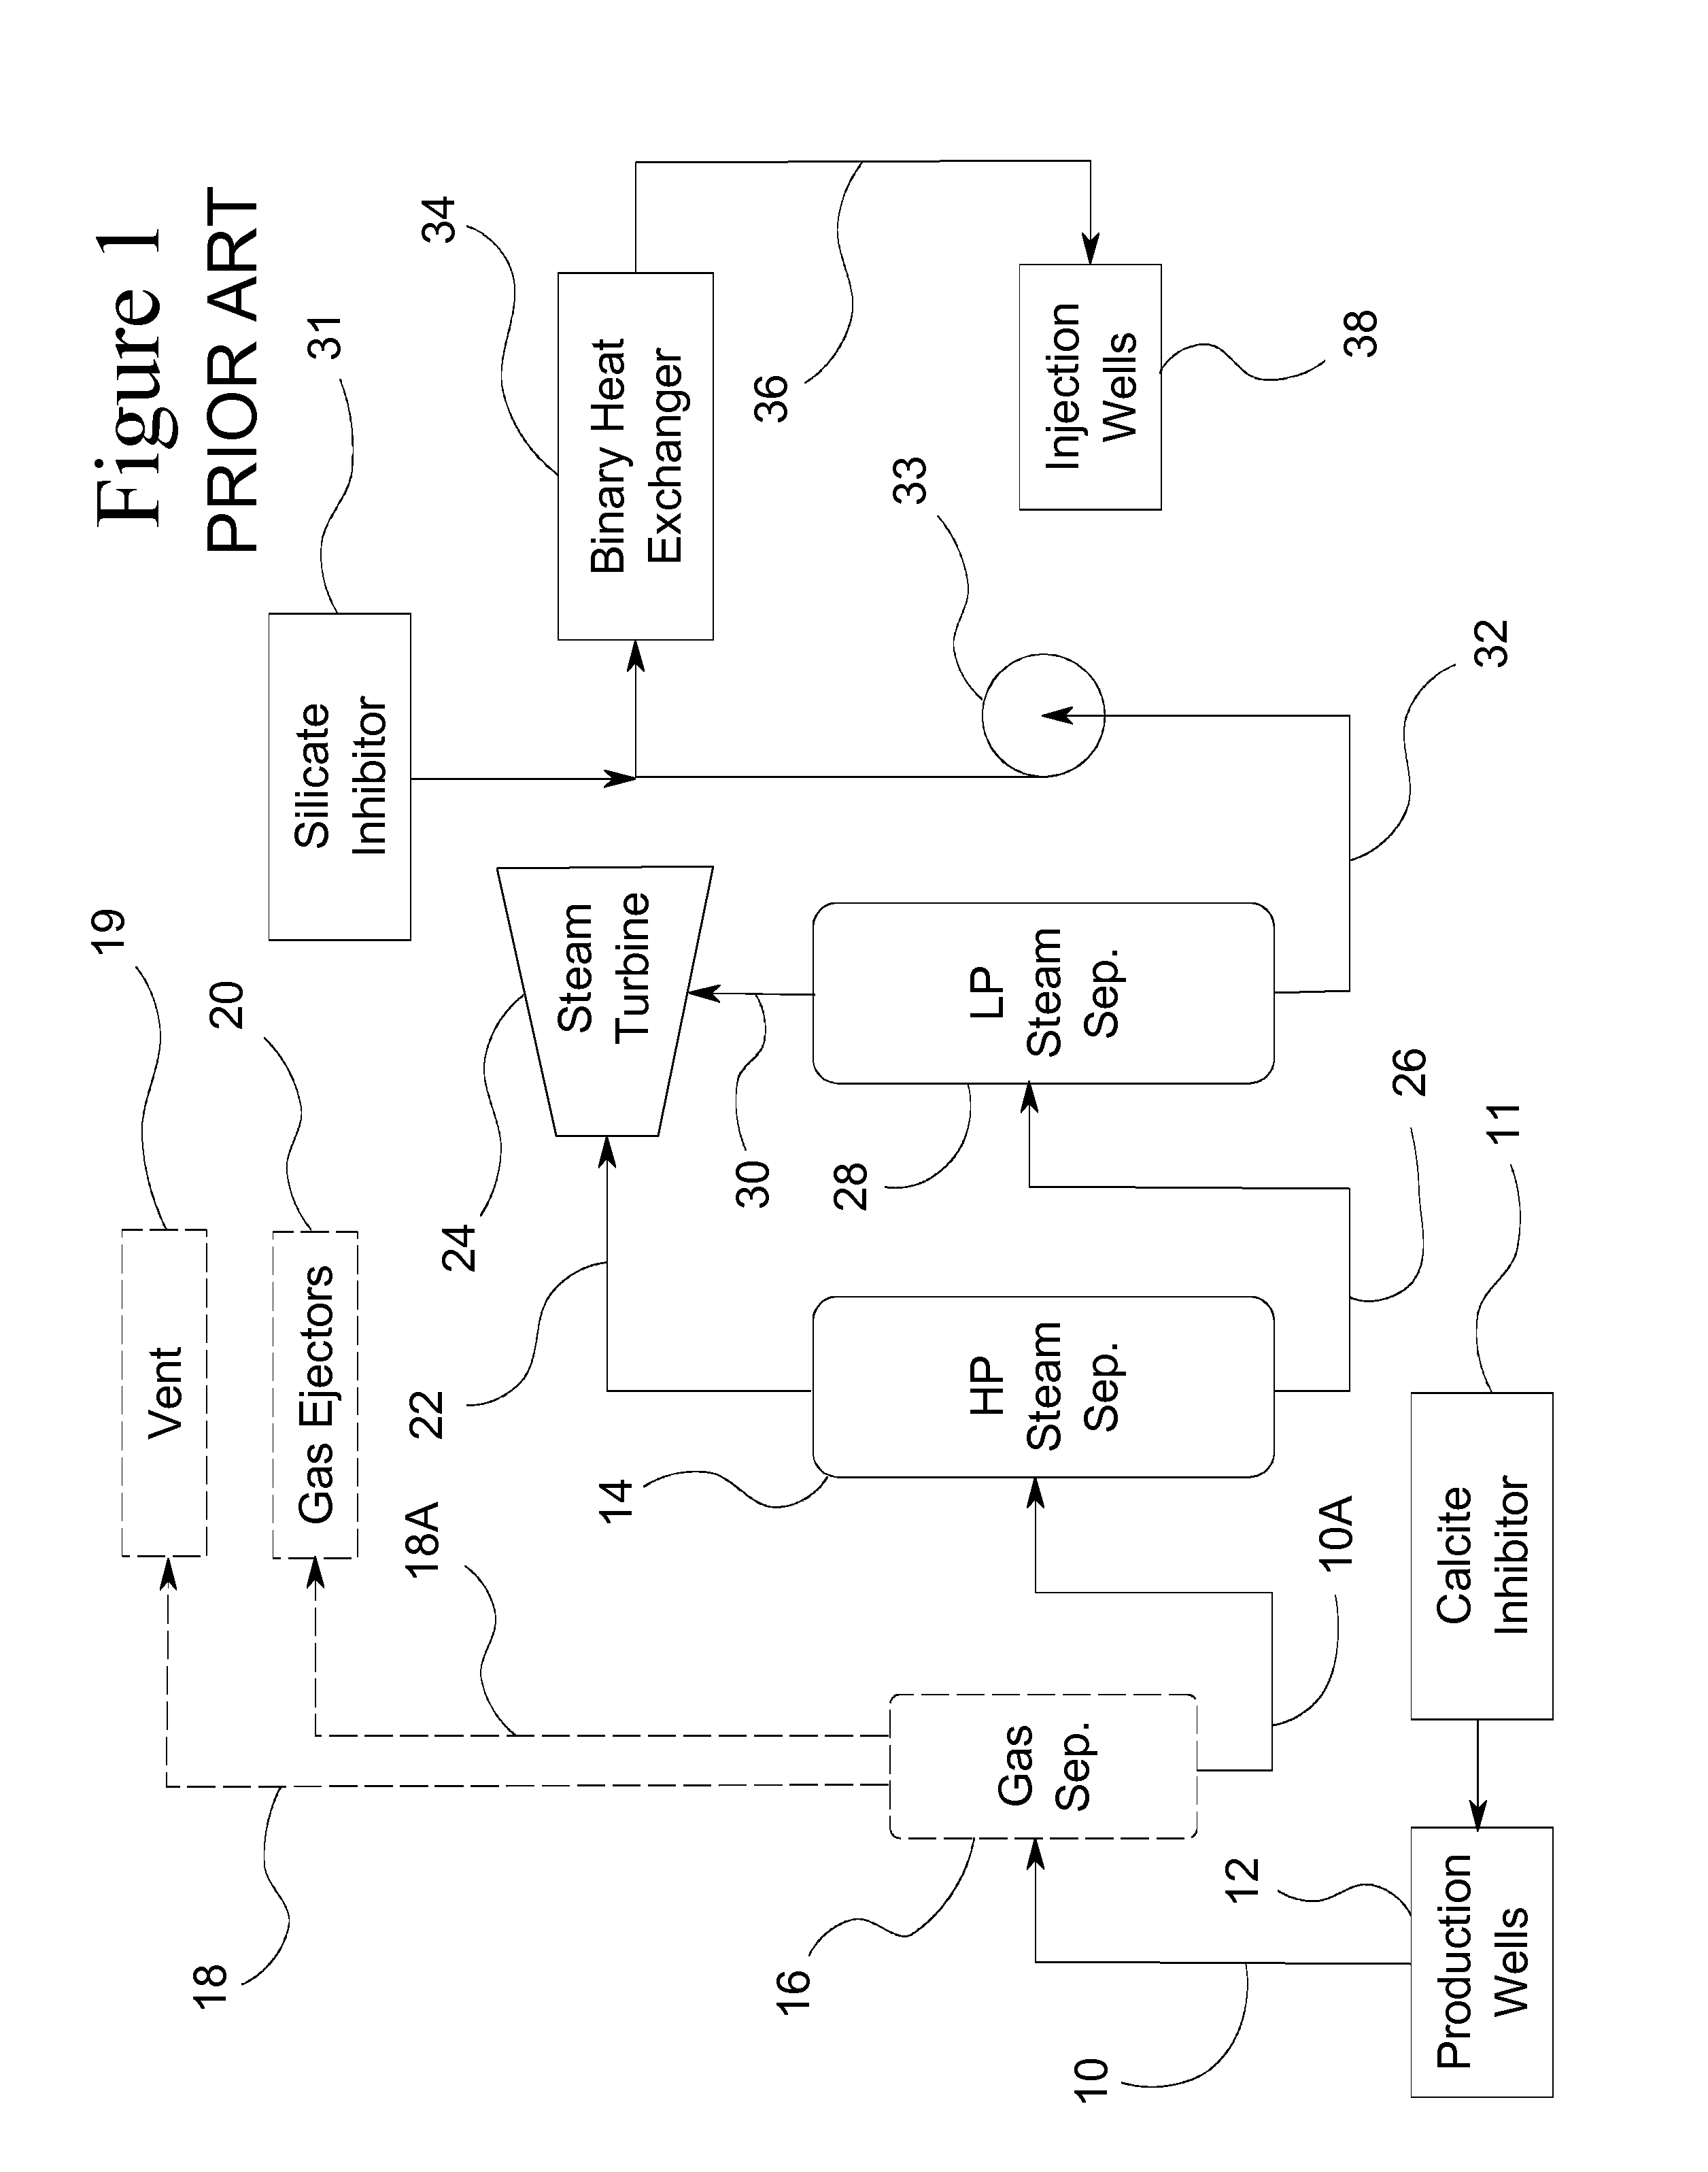 Return carbon dioxide to flashed geothermal brine to control scale deposition in a geothermal power plant